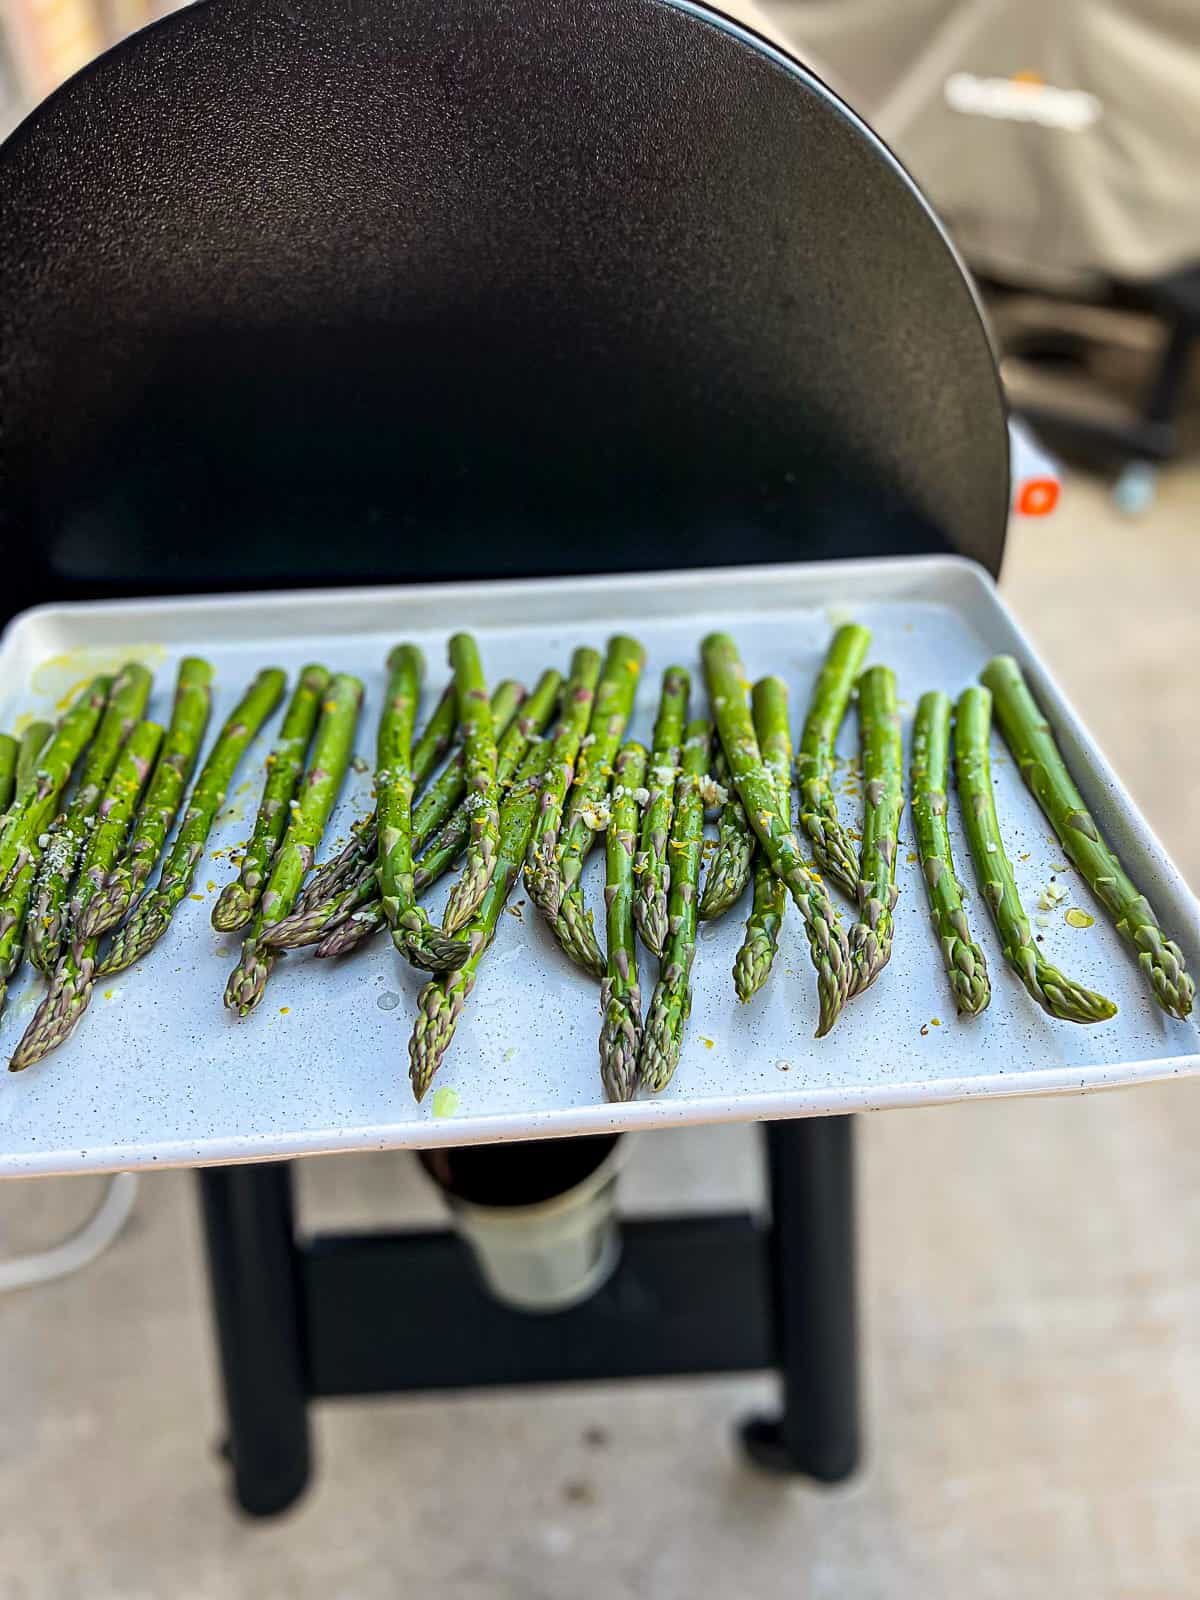 Traeger grills smoker with smoked asparagus on the pellet grill shelf